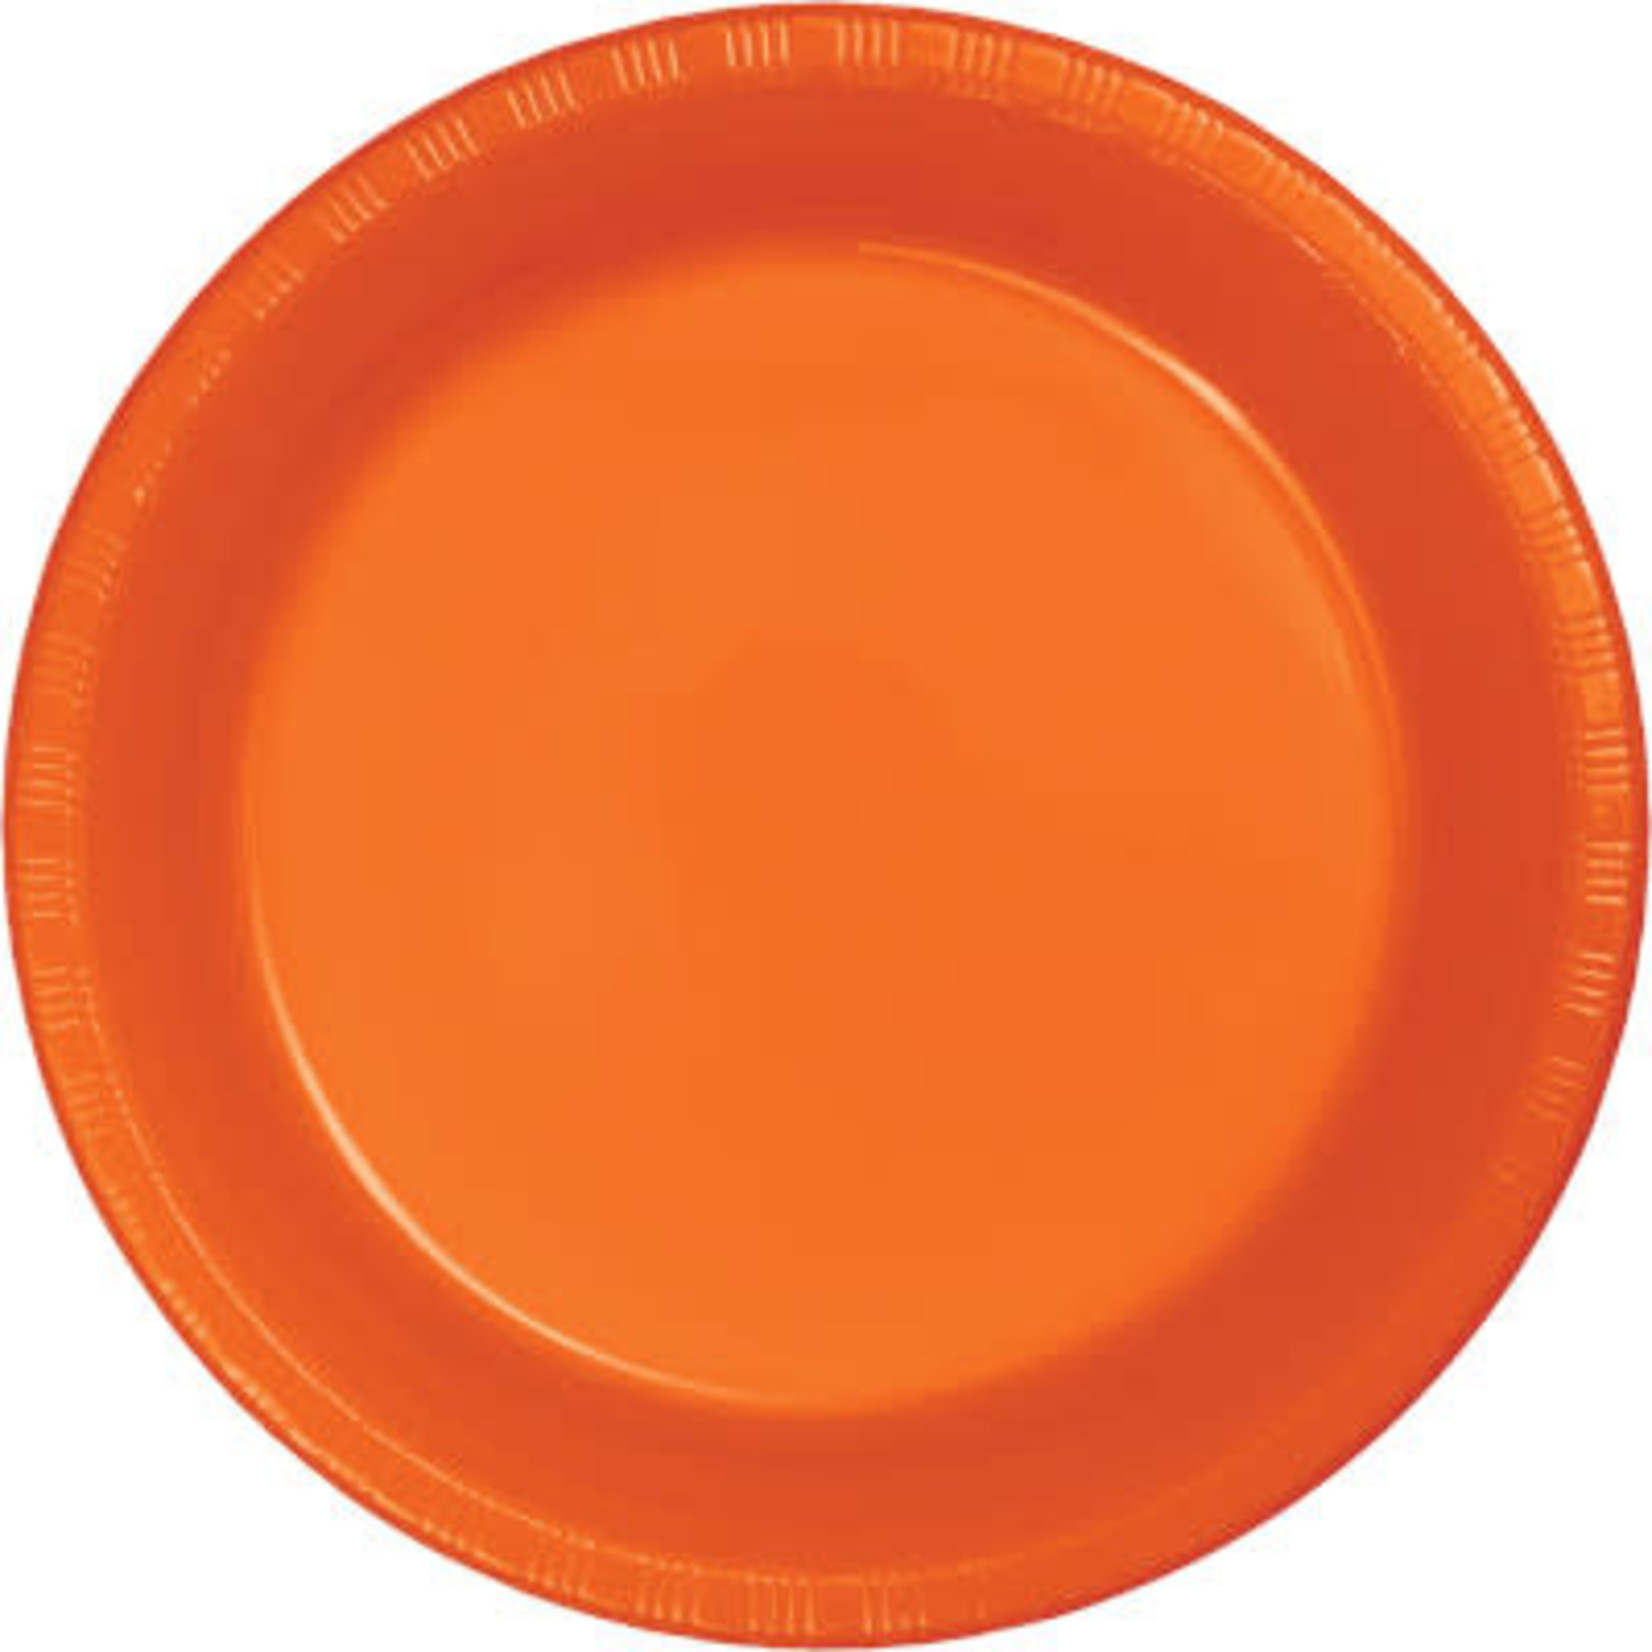 Touch of Color 10" Sunkissed Orange Plastic Banquet Plates - 20ct.